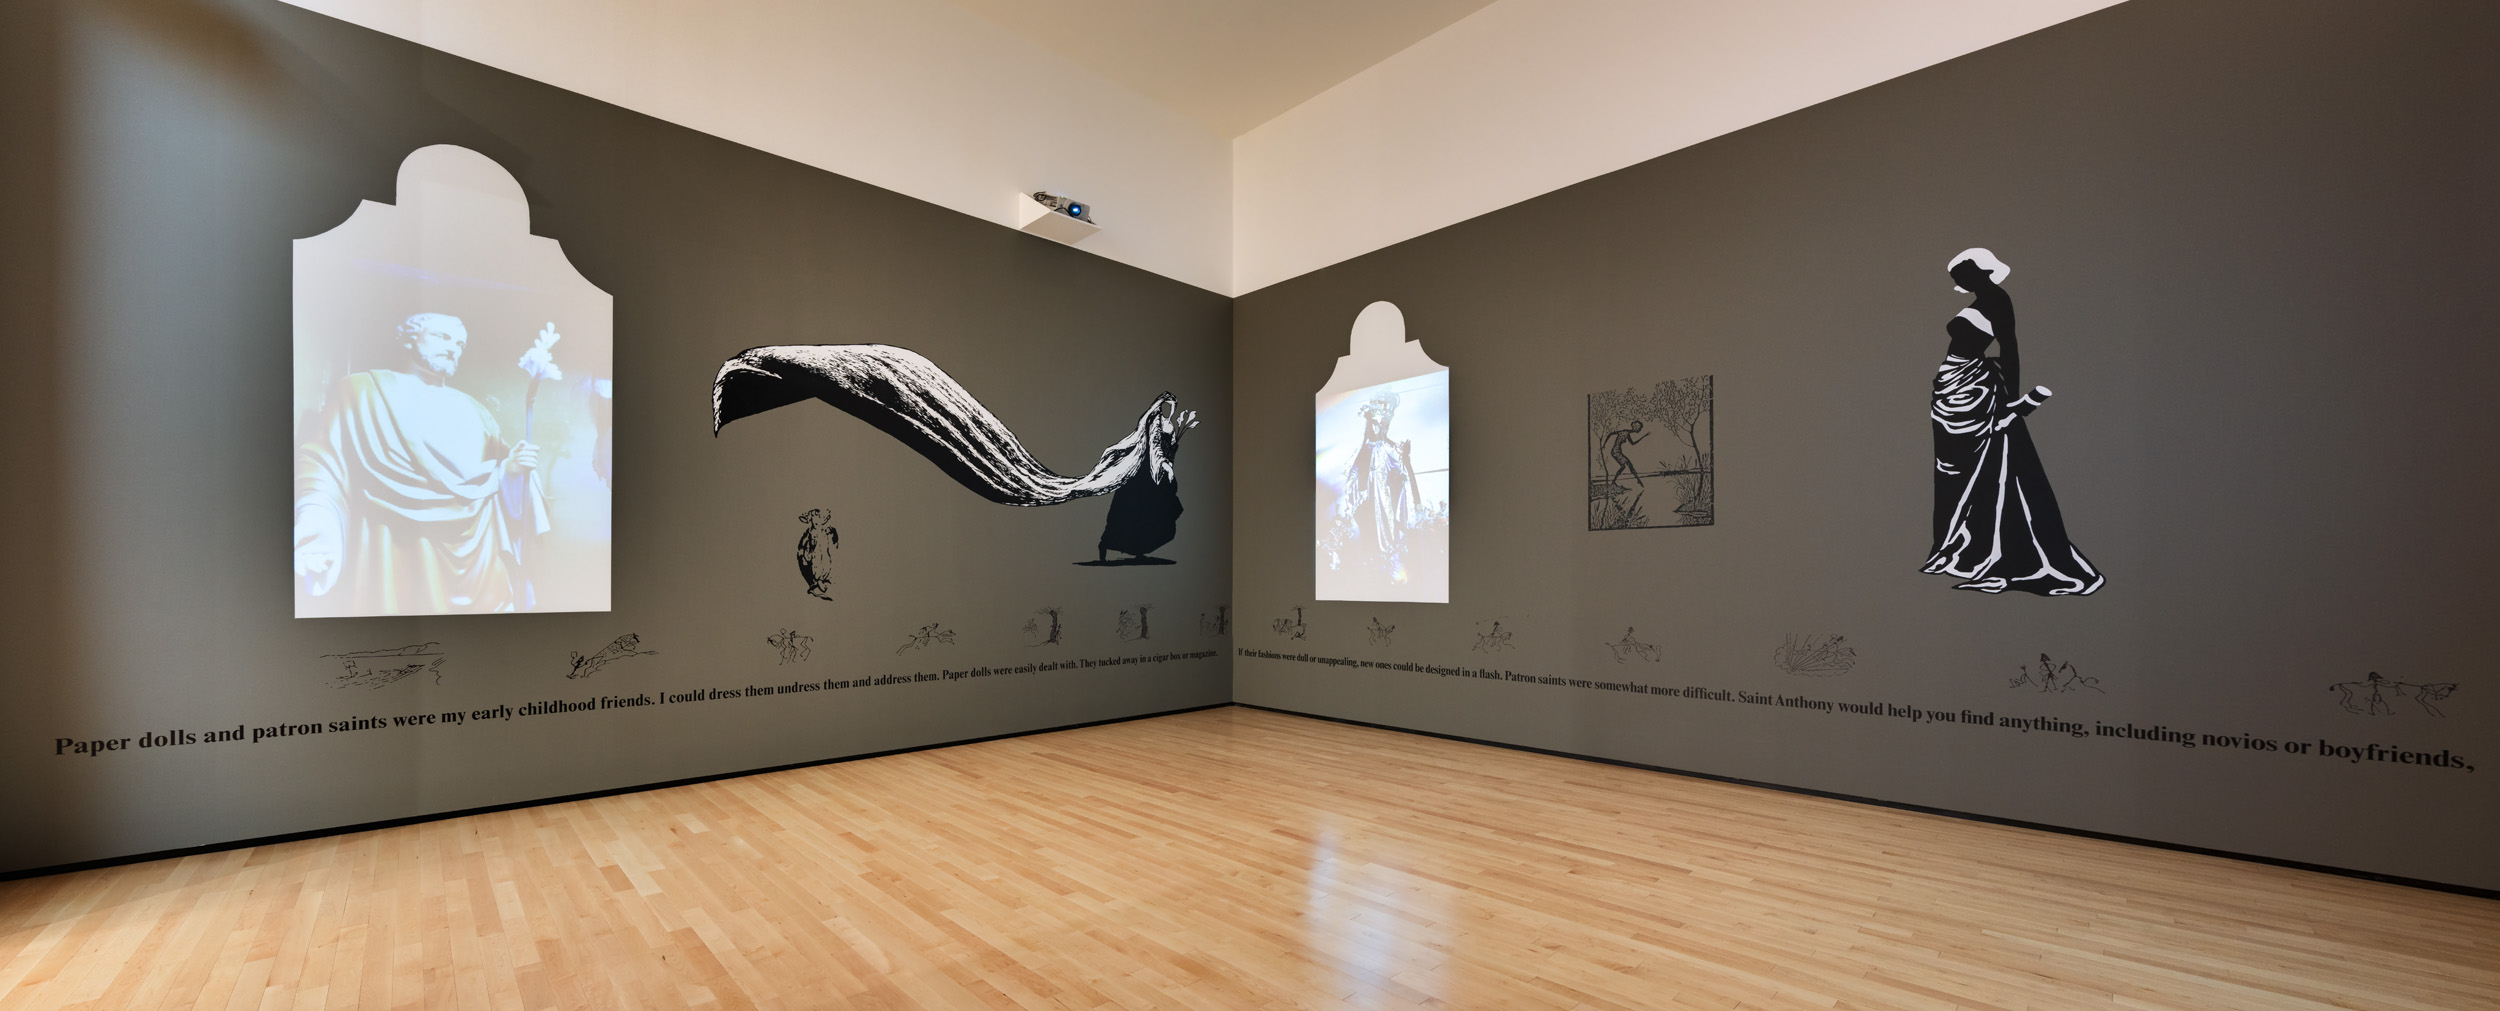 Interior of a museum gallery, where two gray-brown walls meet. On each wall are representations of robed figures combined with text.